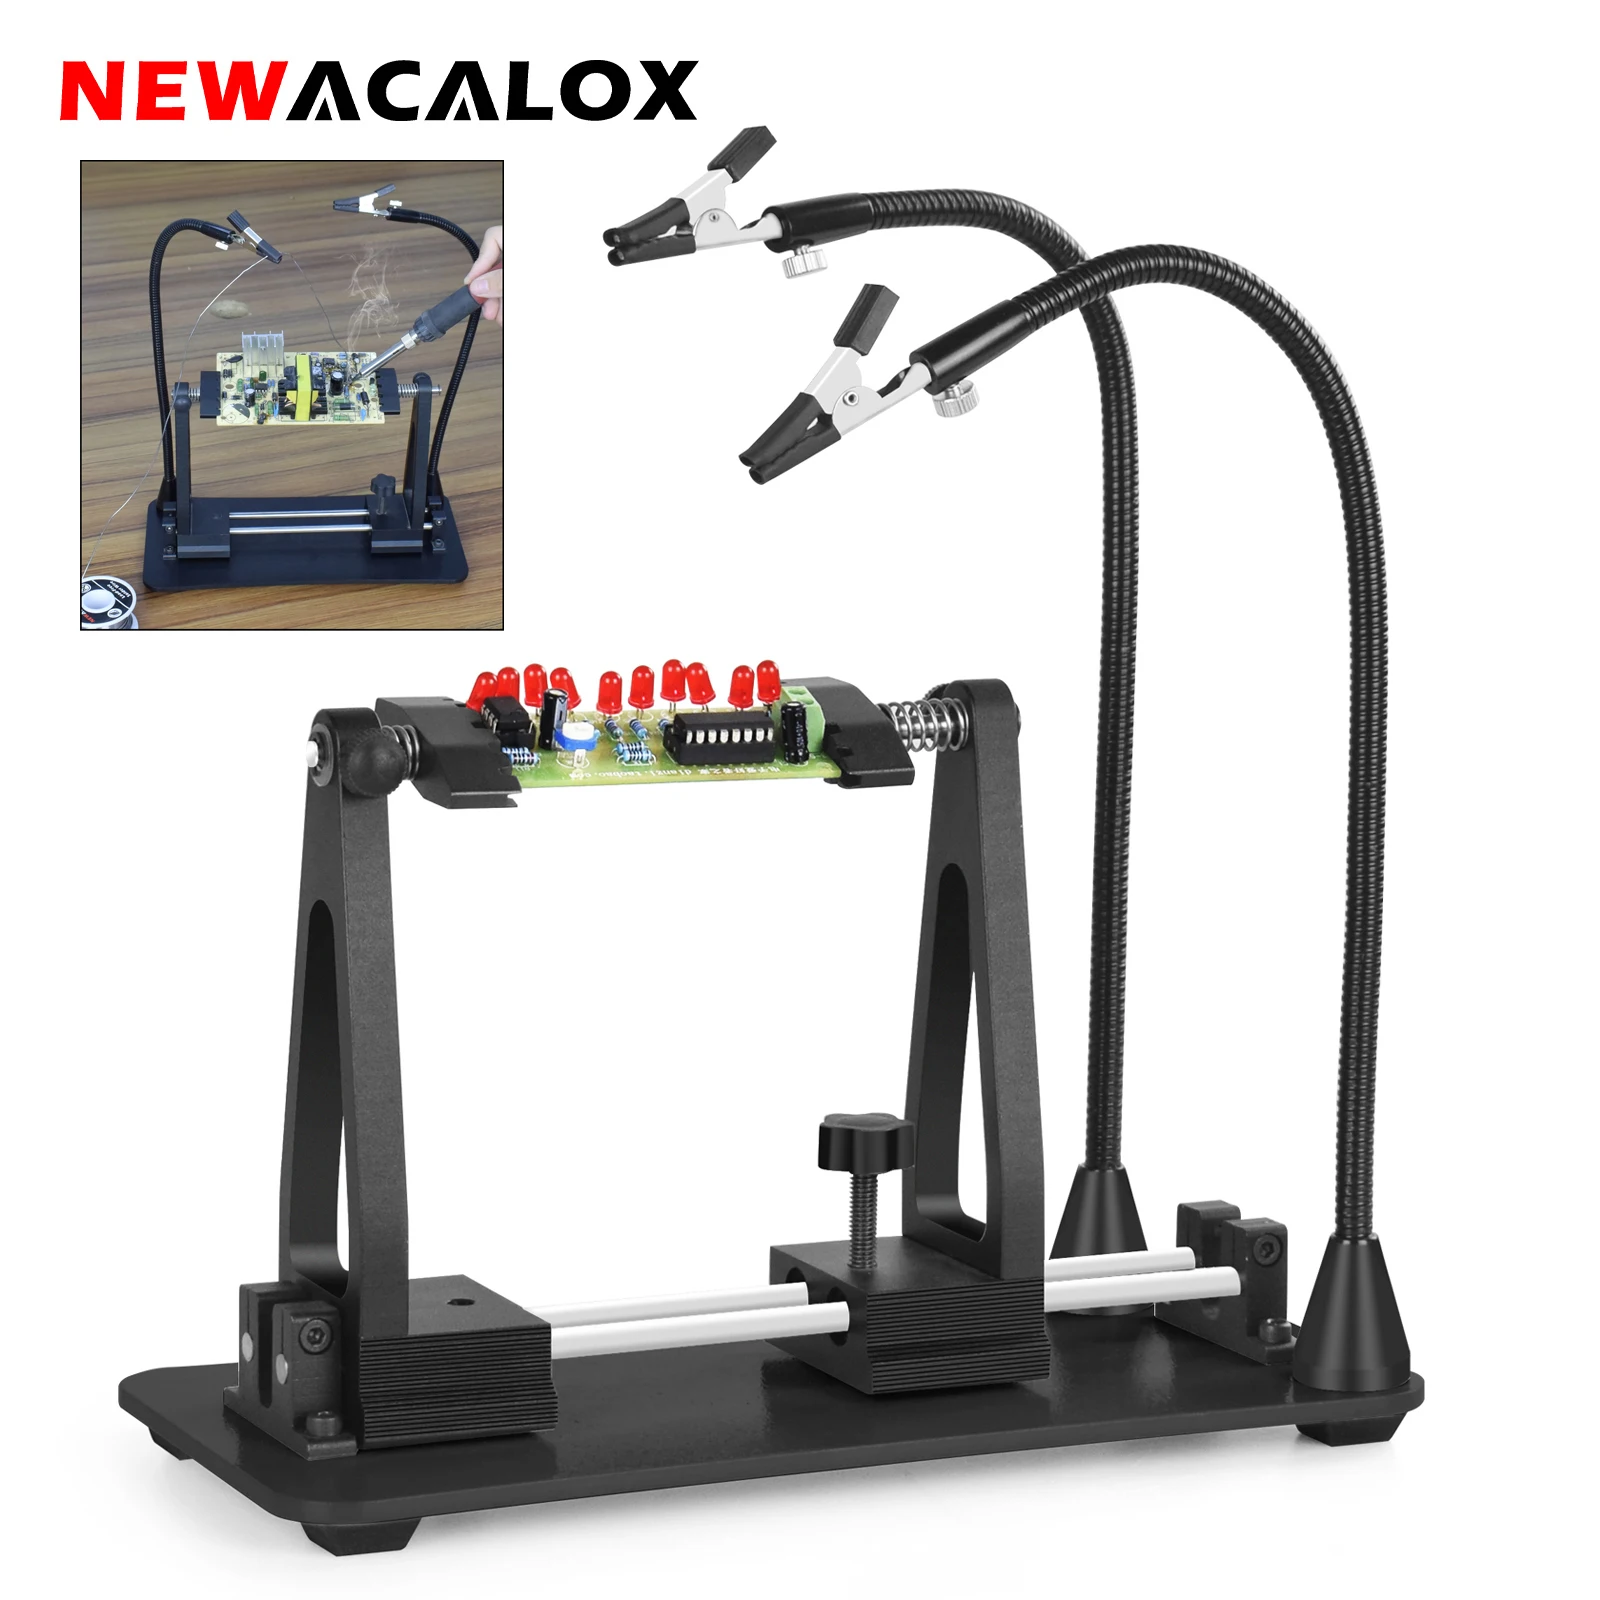 NEWACALOX 360° Adjustable PCB Holder with 2Pcs Magnetic Flexible Soldering Third Hand Welding Repair Helping Hands Station newacalox 360° adjustable pcb holder with 2pcs magnetic flexible soldering third hand welding repair helping hands station